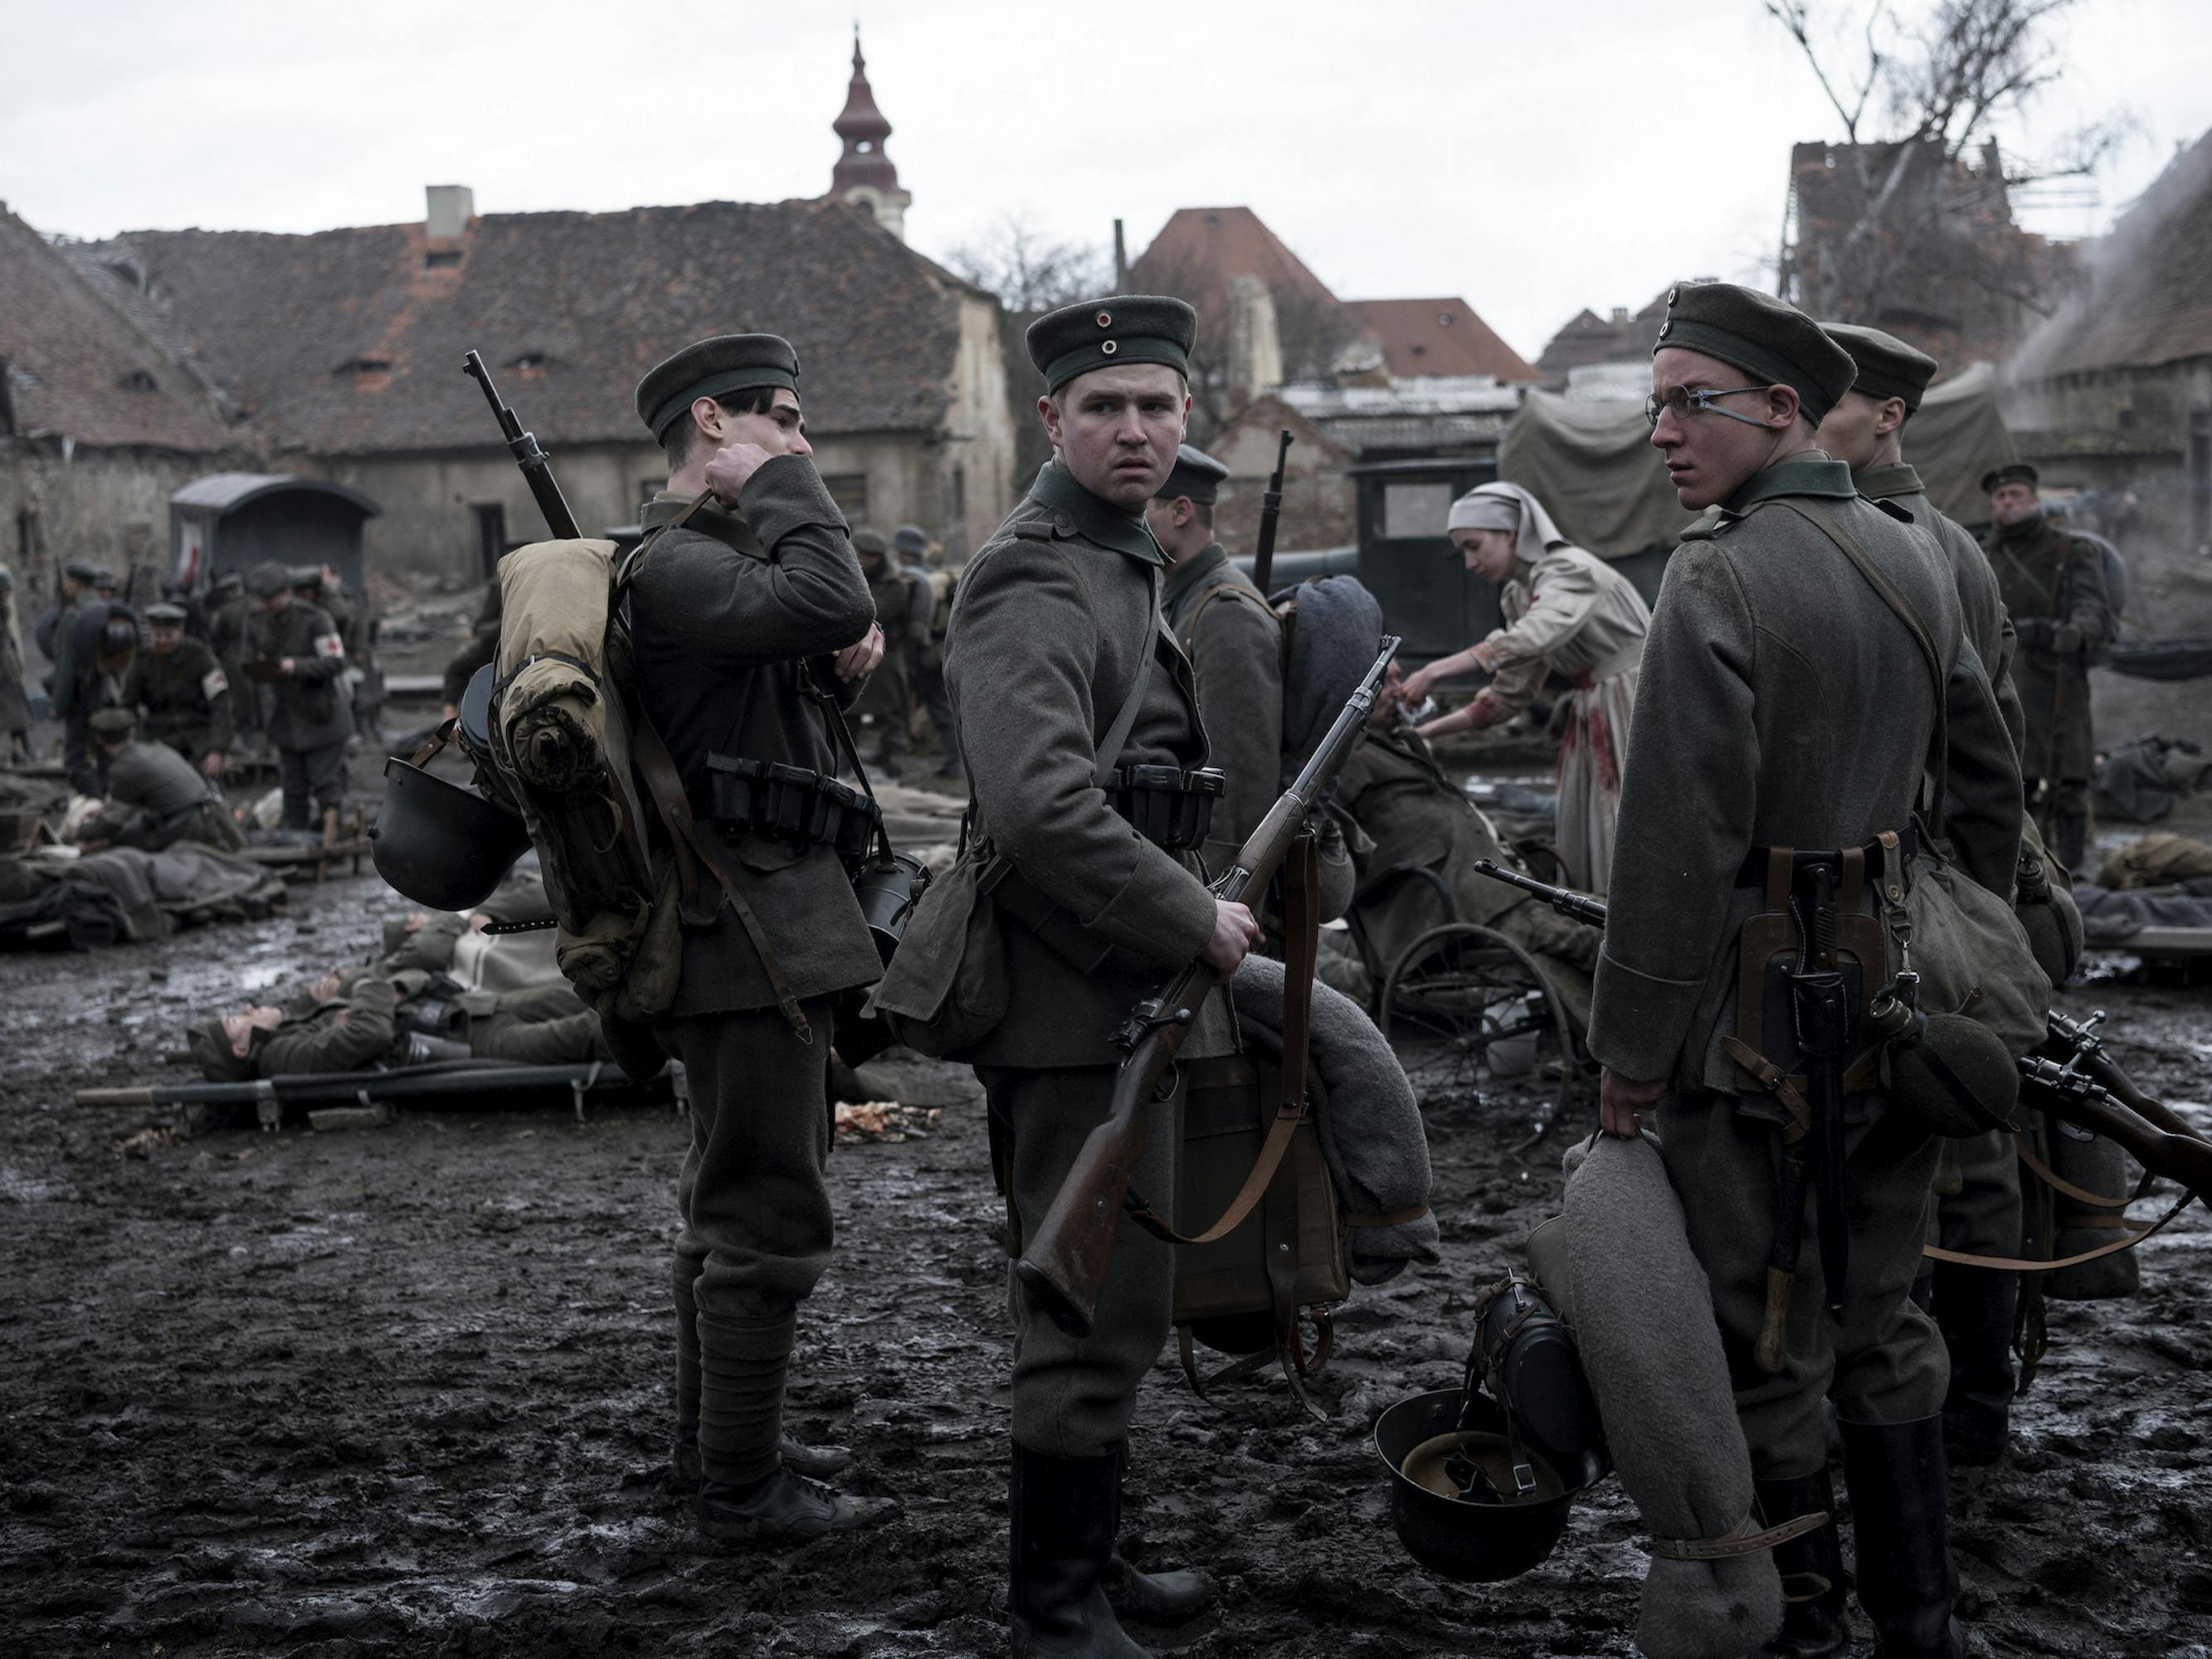 Albert Kropp (Aaron Hilmer), Franz Müller (Moritz Klaus), Lugwig Behm (Adrian Grünewald) stand with other soldiers in this muddy outdoor scene. Behind them is a nurse tending to an injury.